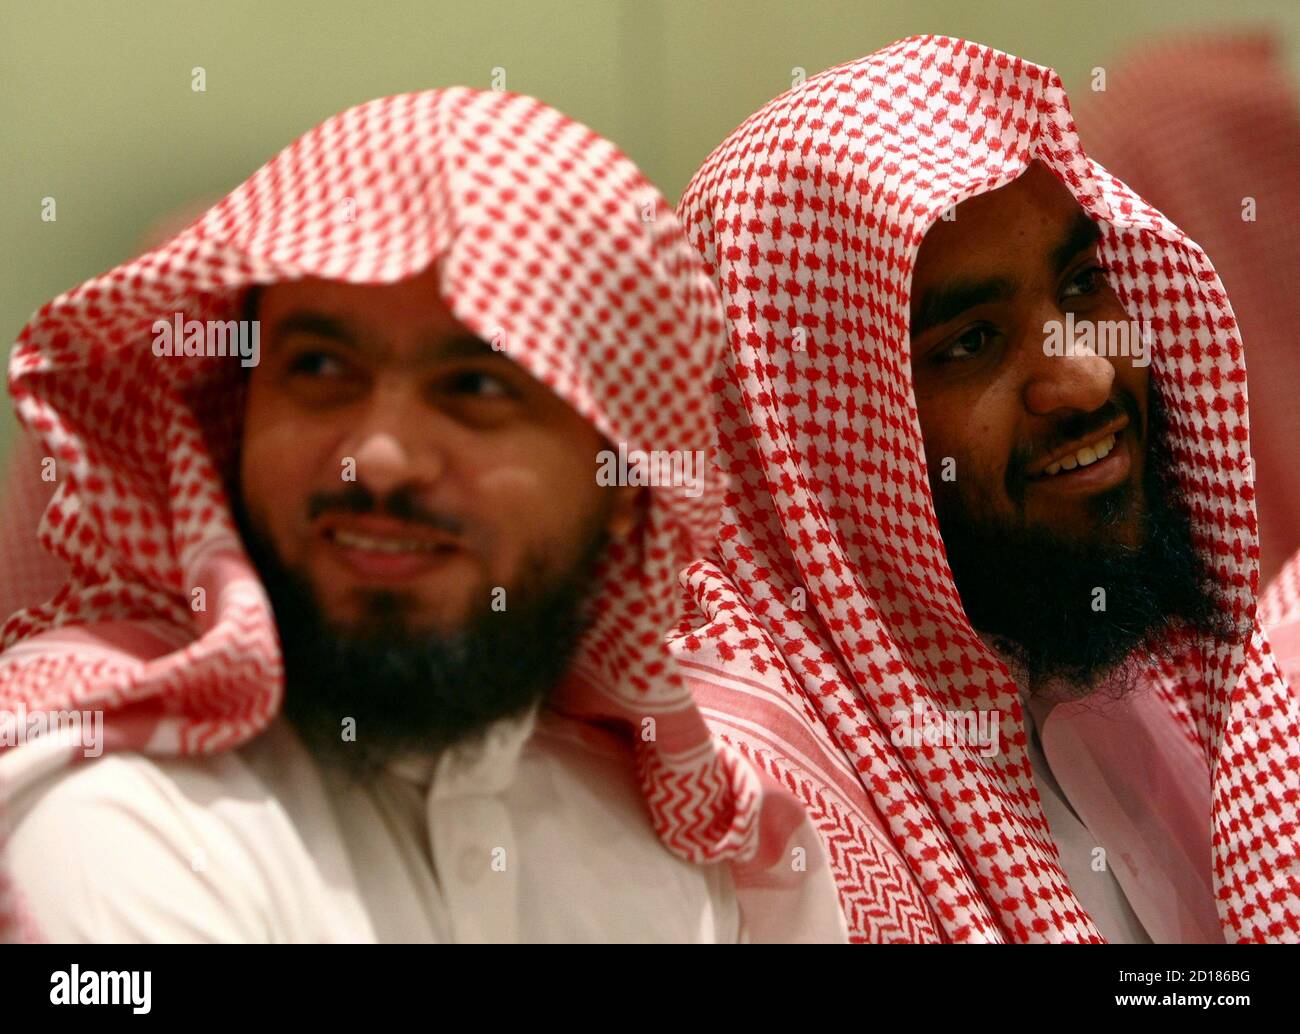 Members of the Committee for the Promotion of Virtue and Prevention of Vice, or religious police, attend a training course in Riyadh  April 29, 2009 . REUTERS/Fahad Shadeed (SAUDI ARABIA MILITARY RELIGION) Stock Photo